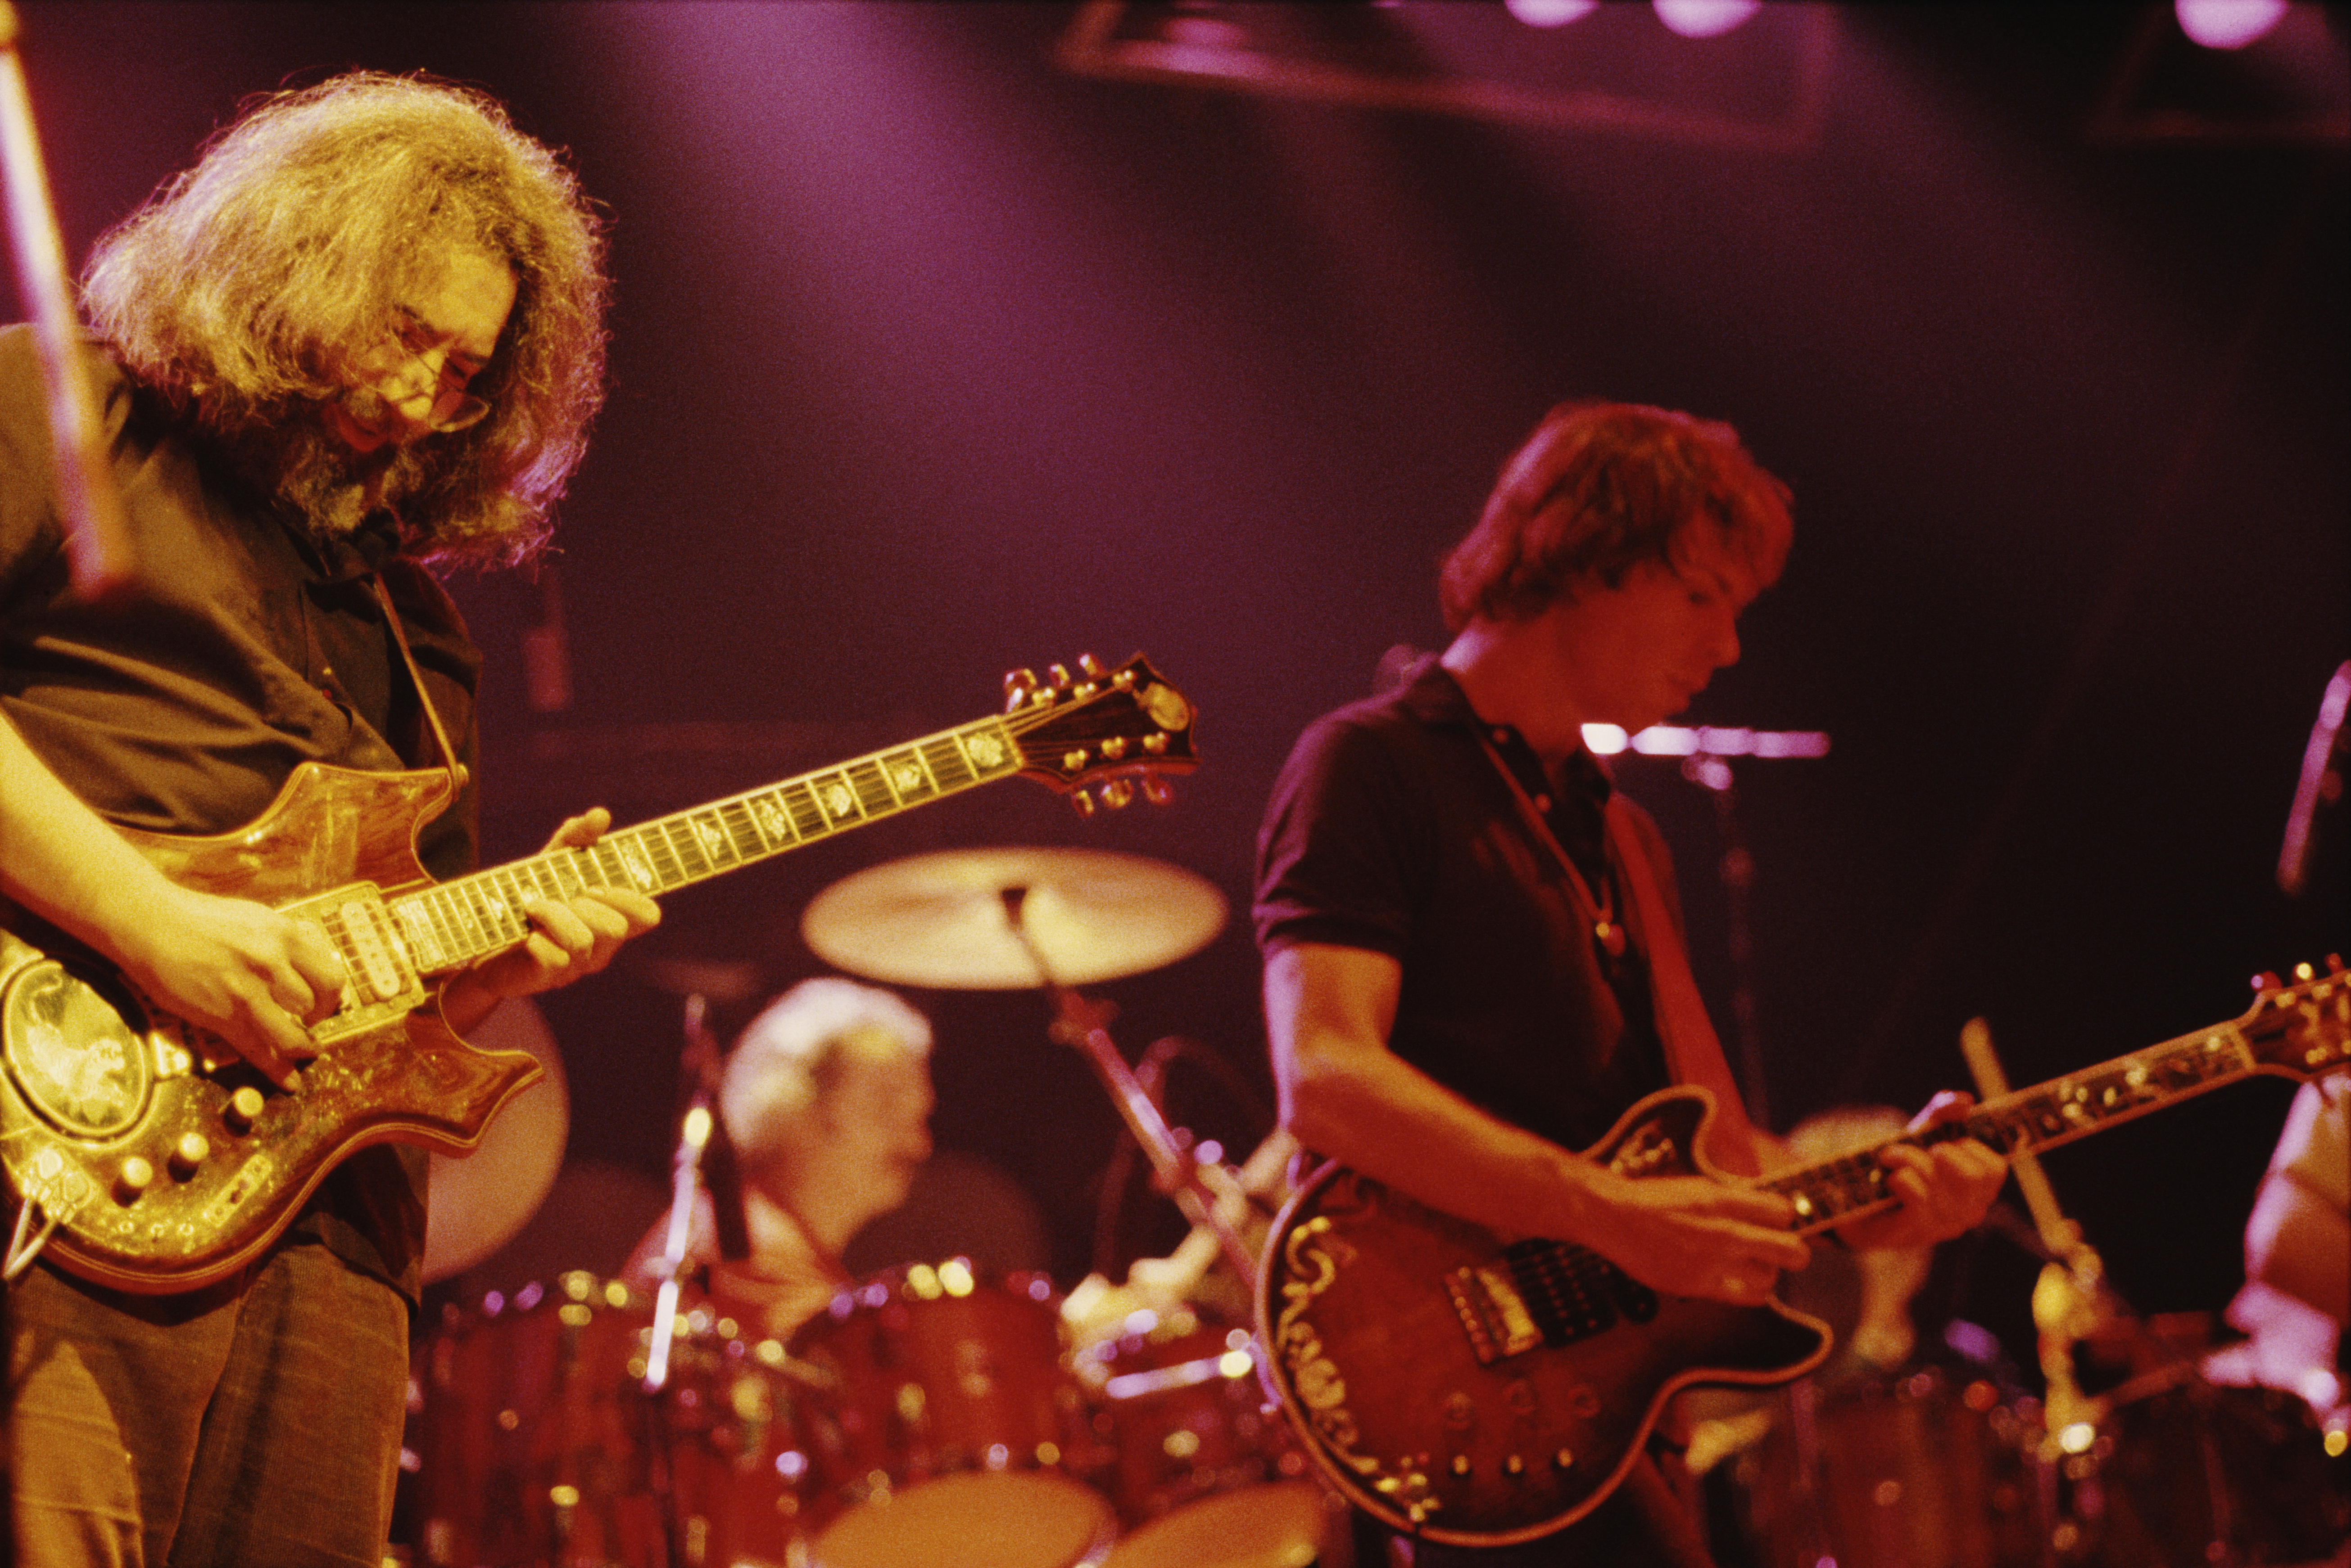 Jerry Garcia (left) and Bob Weir of American rock band The Grateful Dead performing at the Wembley Empire Pool in London on 7th April 1972.